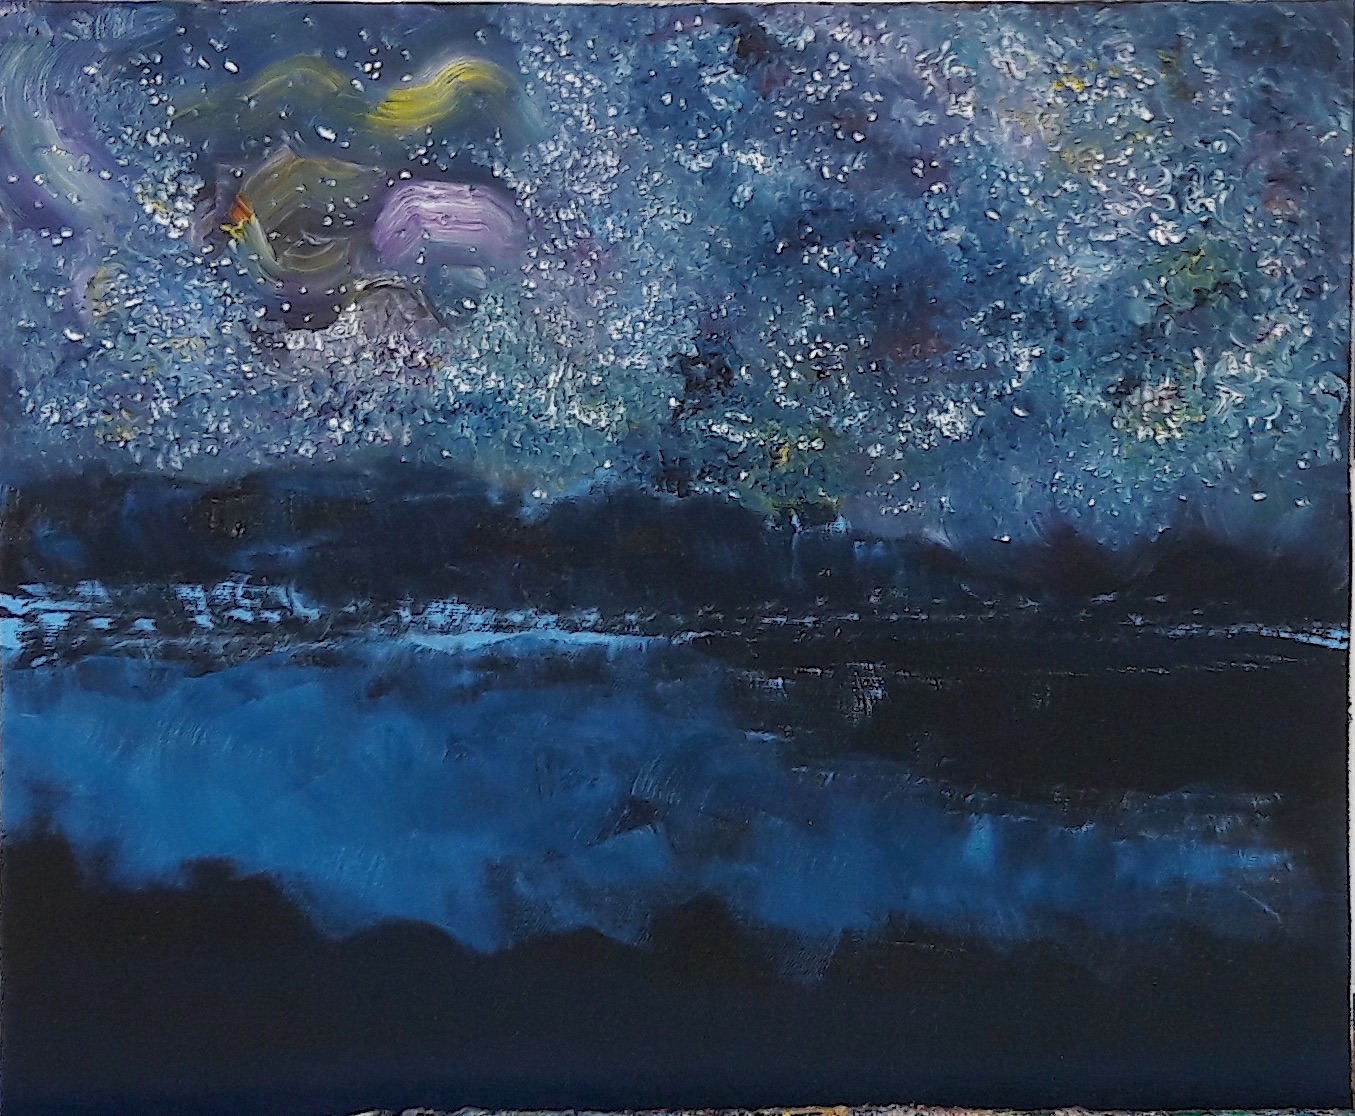 painting of a sky full of stars at night, near a lake, by Samuel Rondiere a.k.a. Sam Elka